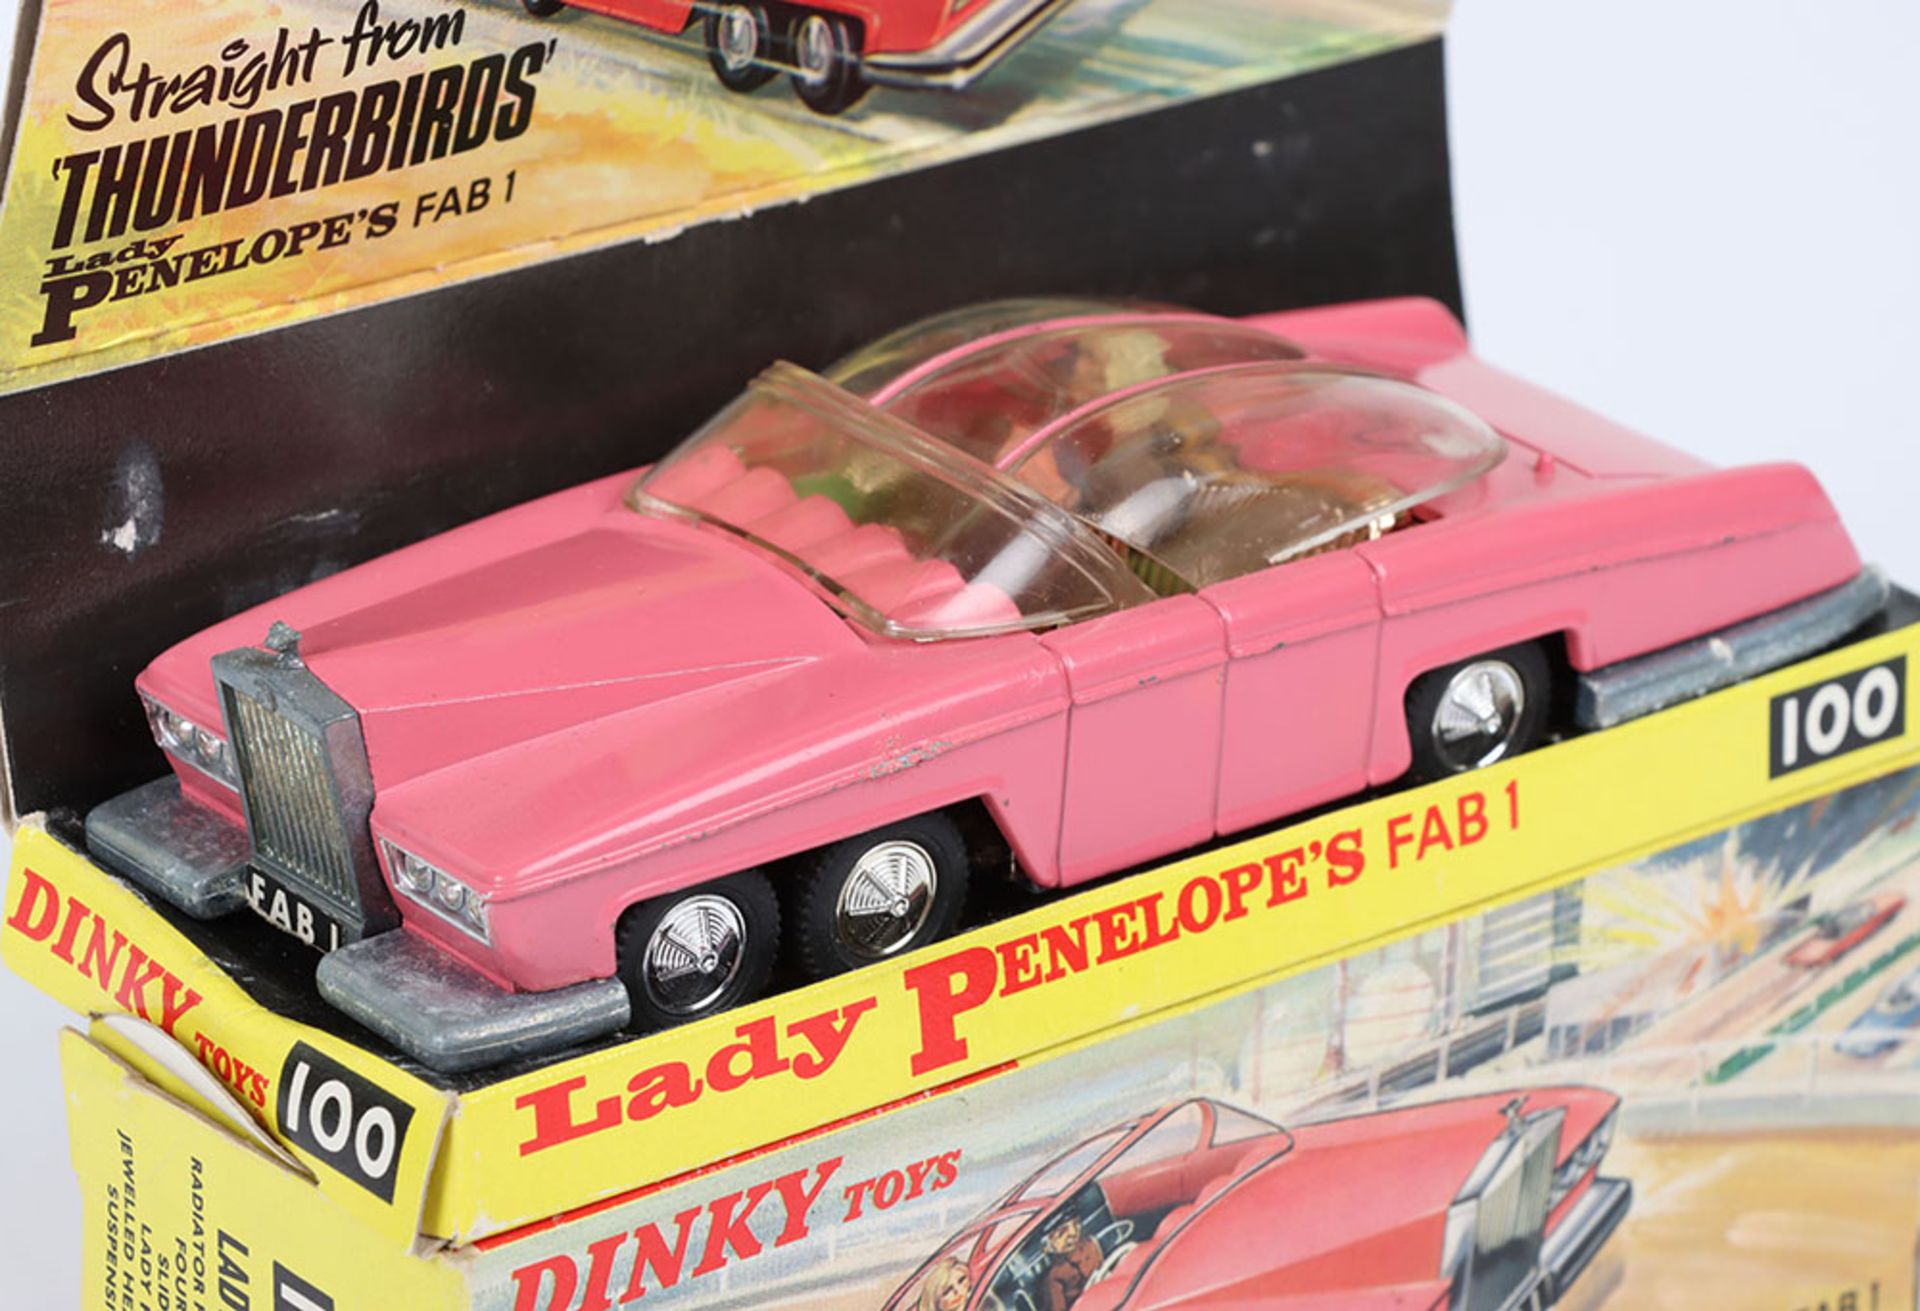 Dinky Toys Boxed 100 Lady Penelope’s FAB 1 From TV series ‘Thunderbirds’ - Image 3 of 4